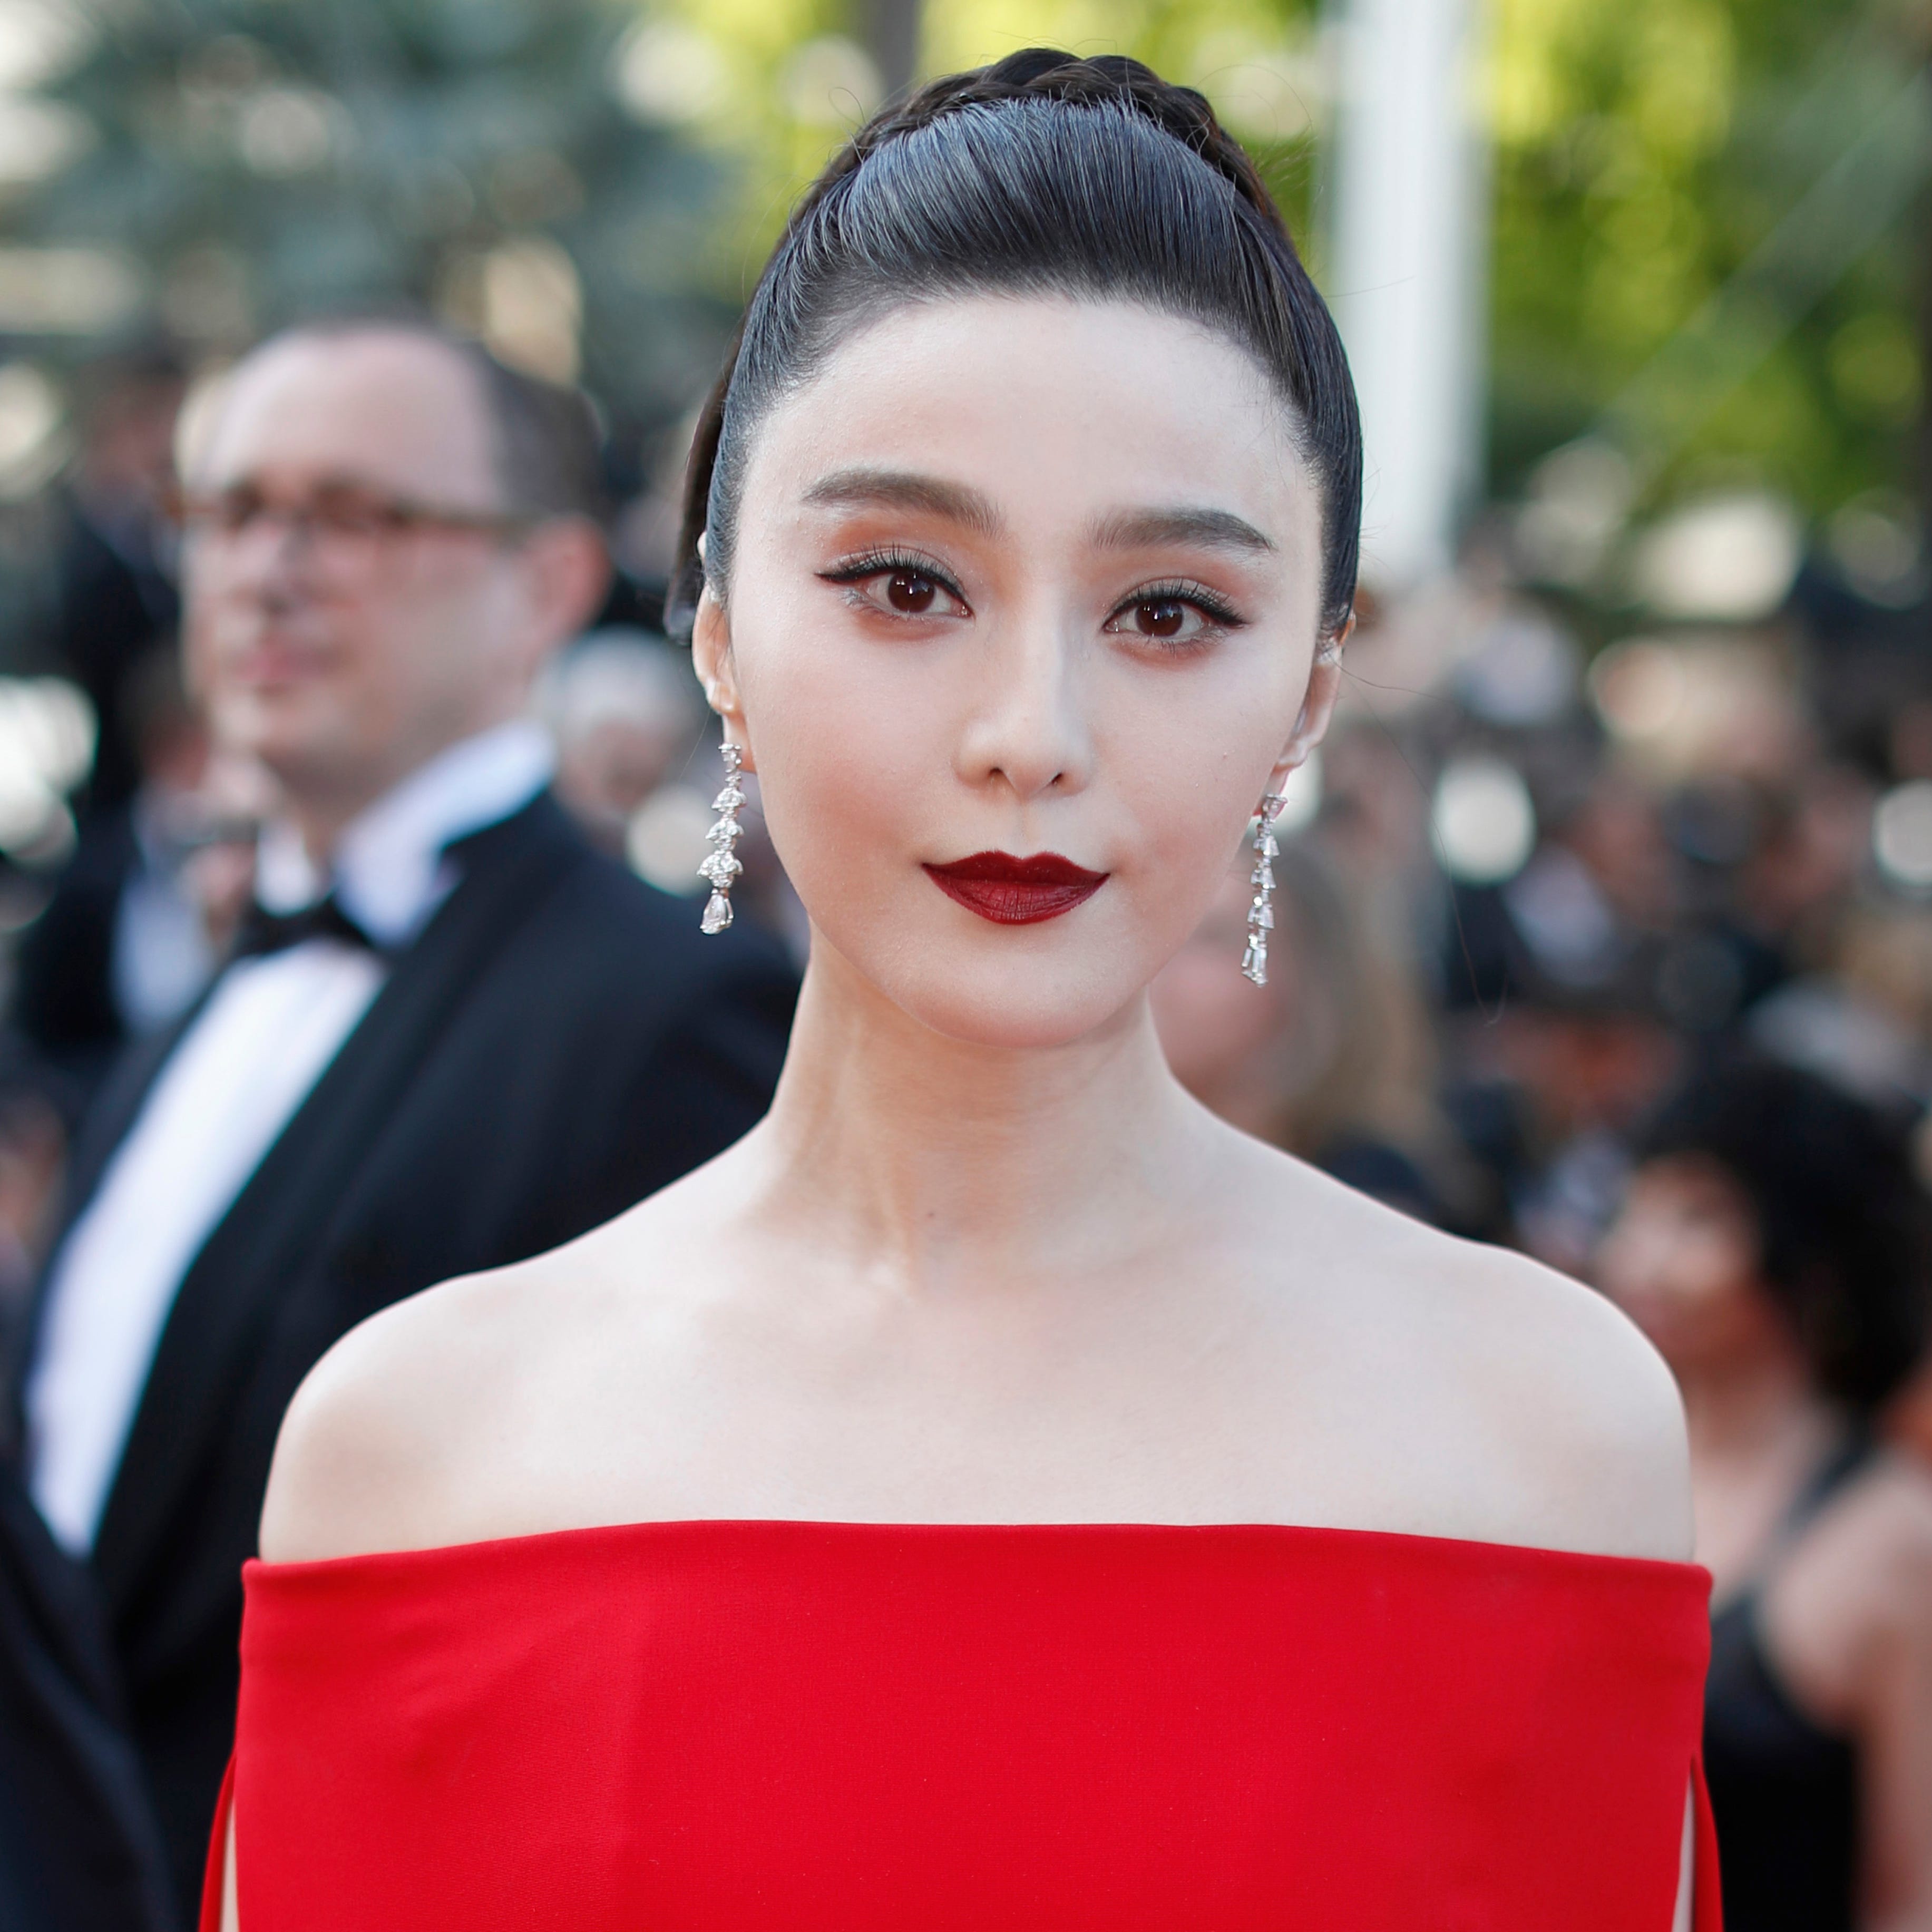 Fan Bingbing poses for photographers as she arrives for the screening of the film 